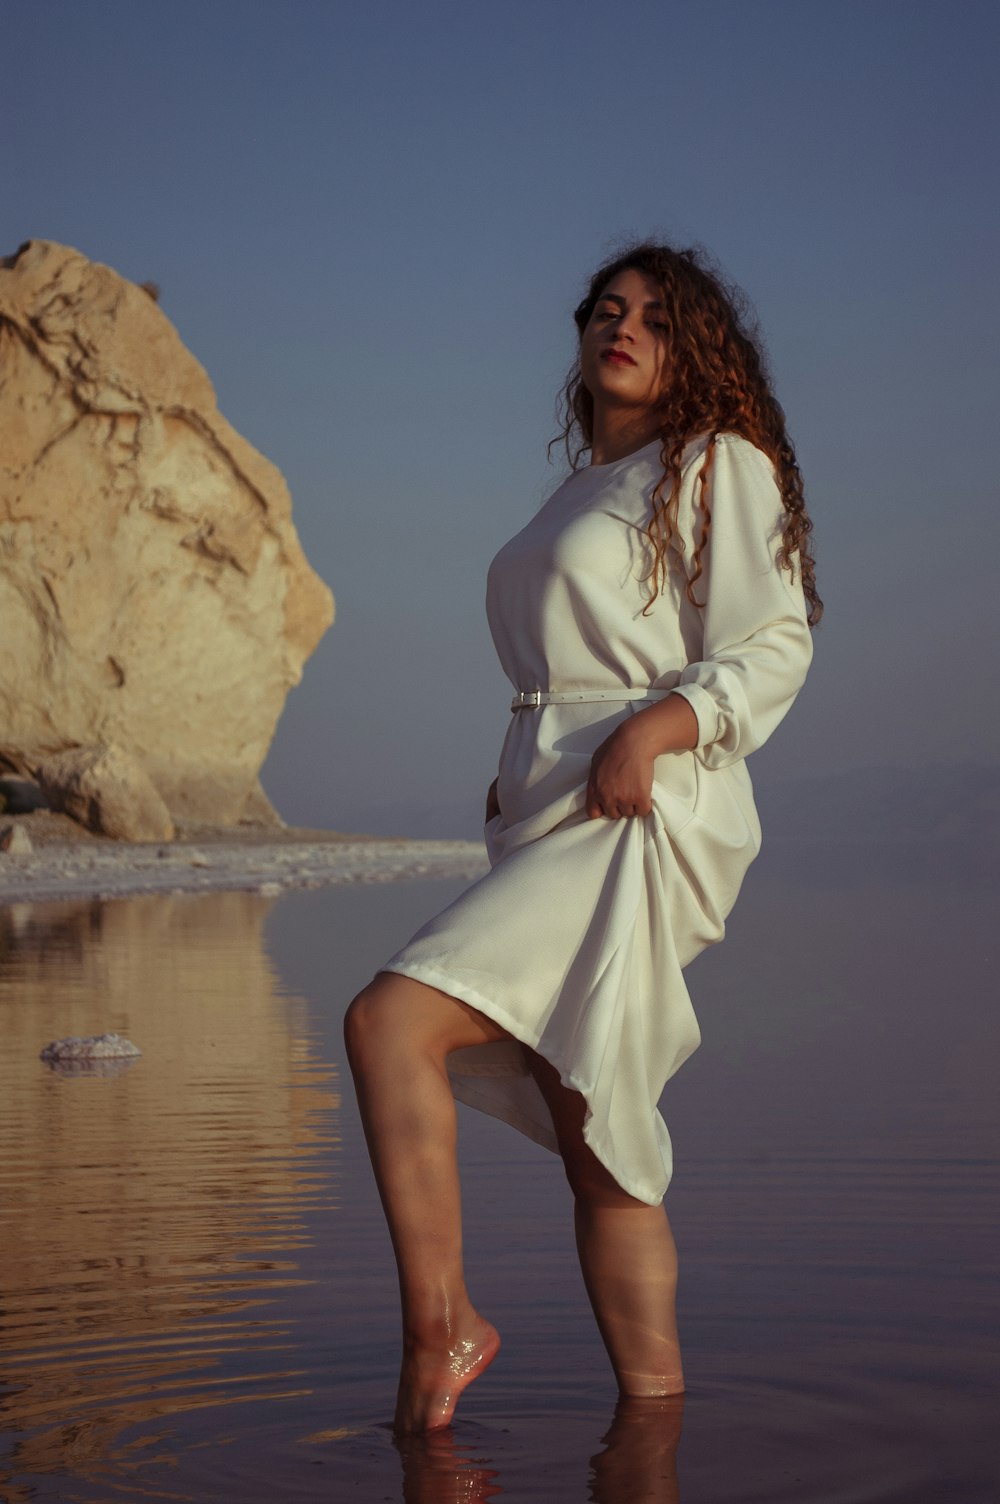 woman in white long sleeve dress standing on brown rock near body of water during daytime